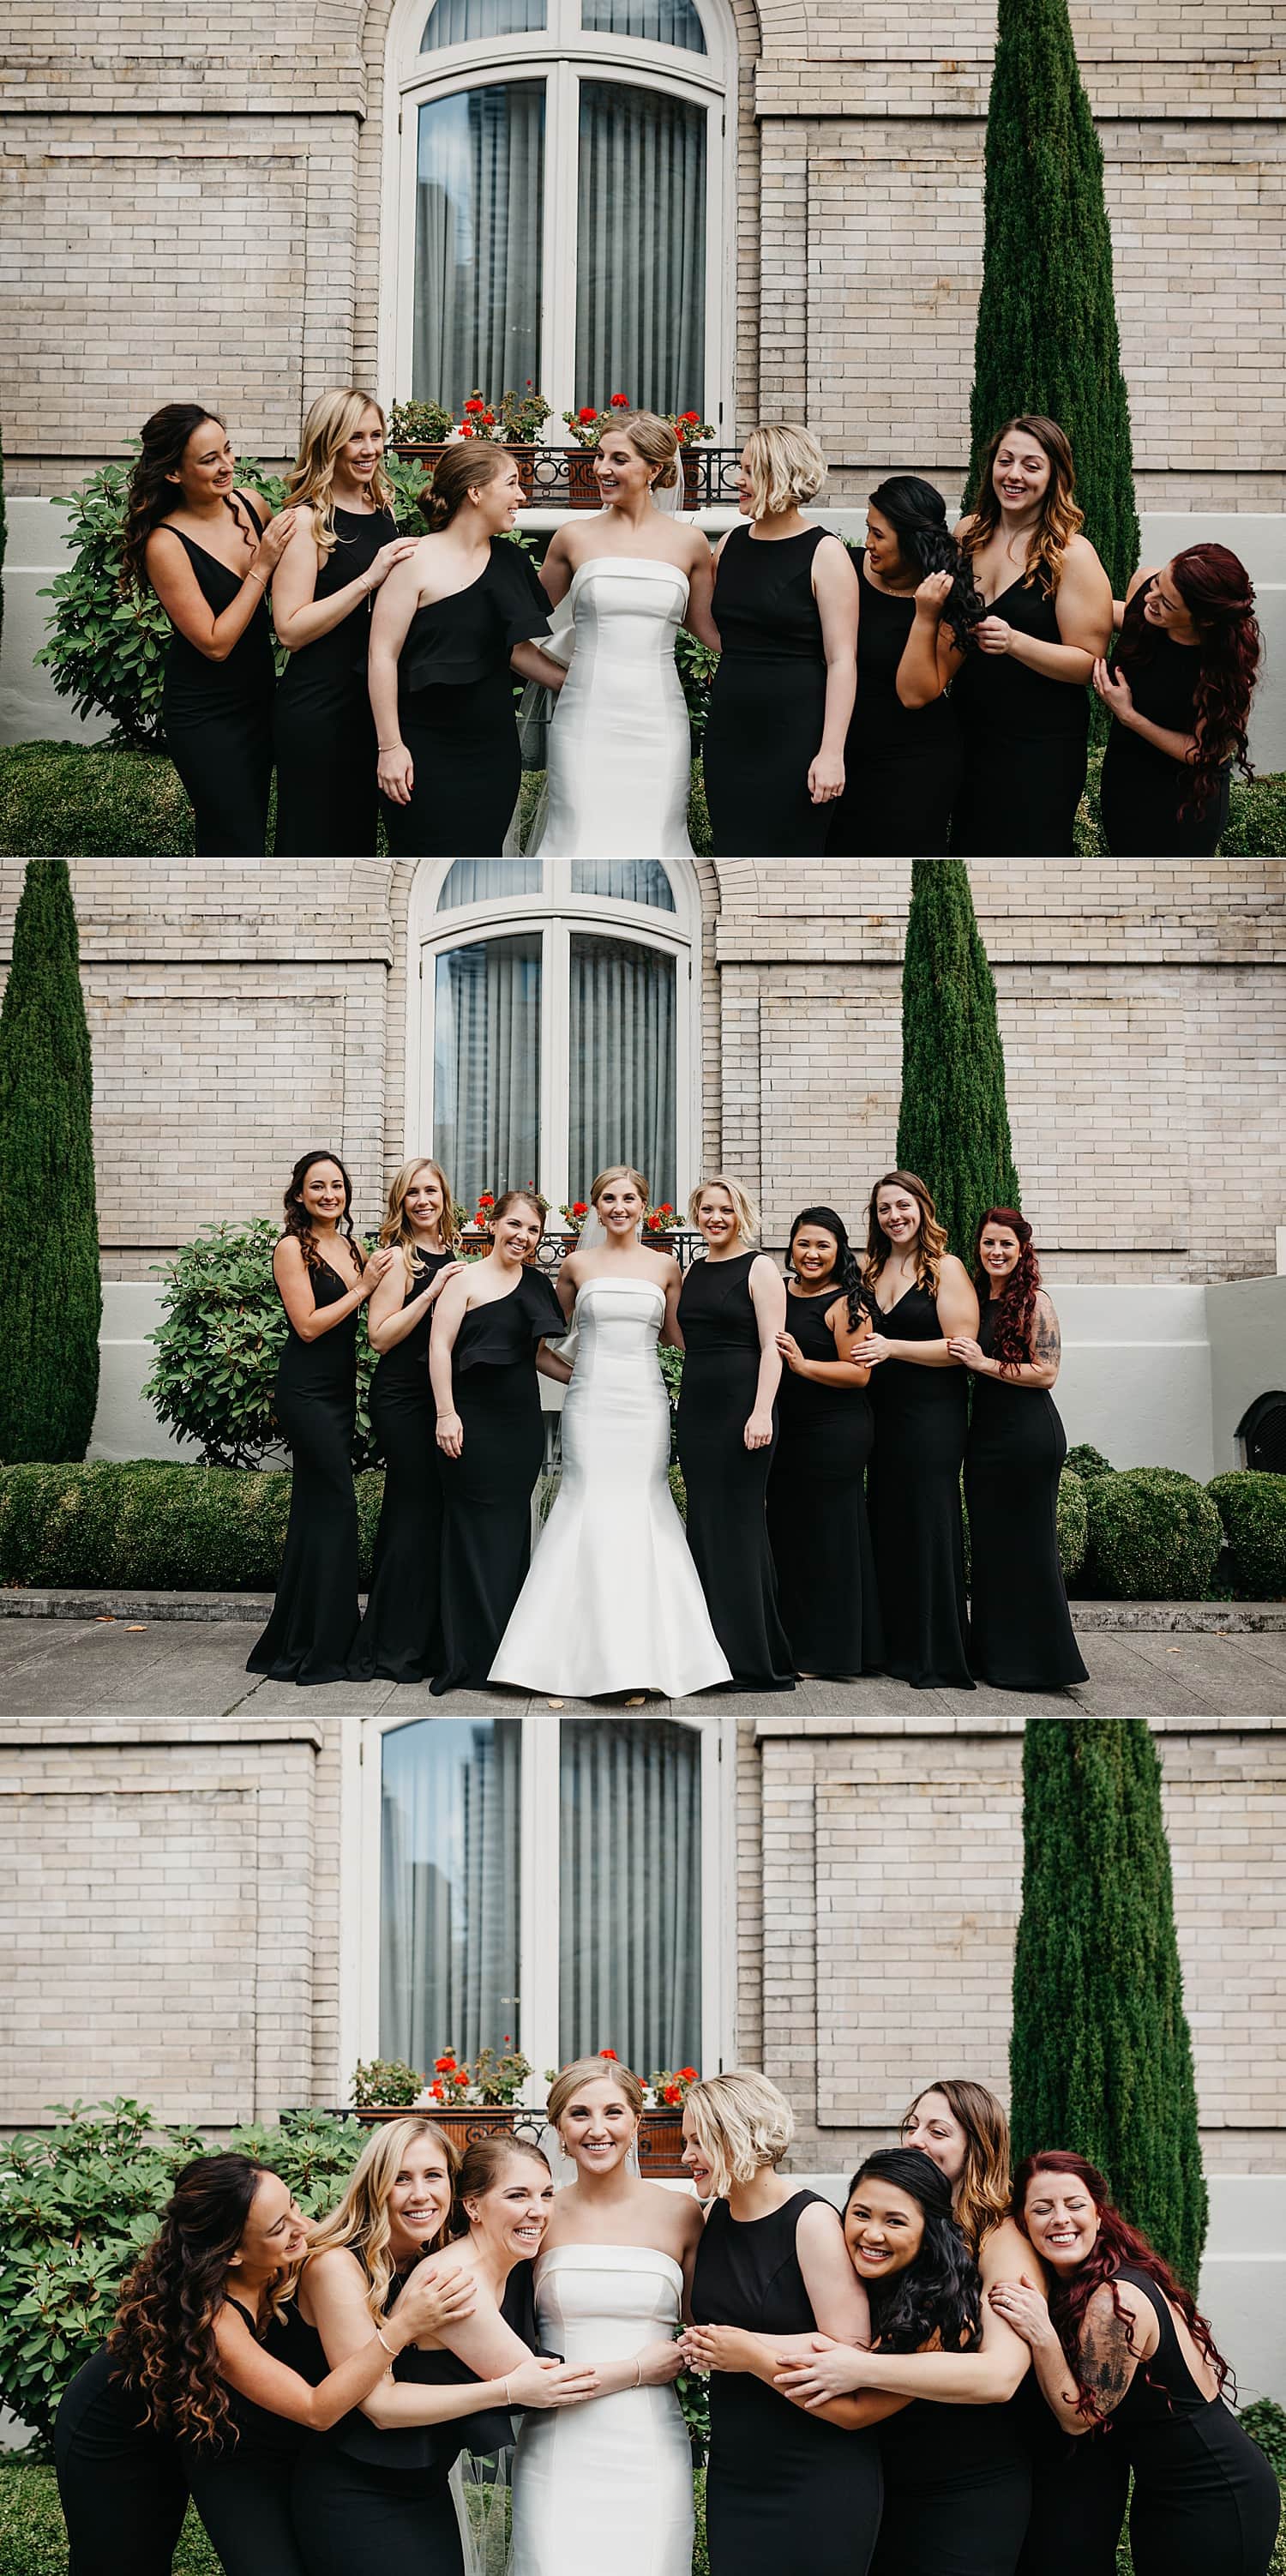 bridal party portraits of the brides with her bridesmaids wearing black 415 Westlake Wedding by Marcela Pulido Seattle Wedding Photography